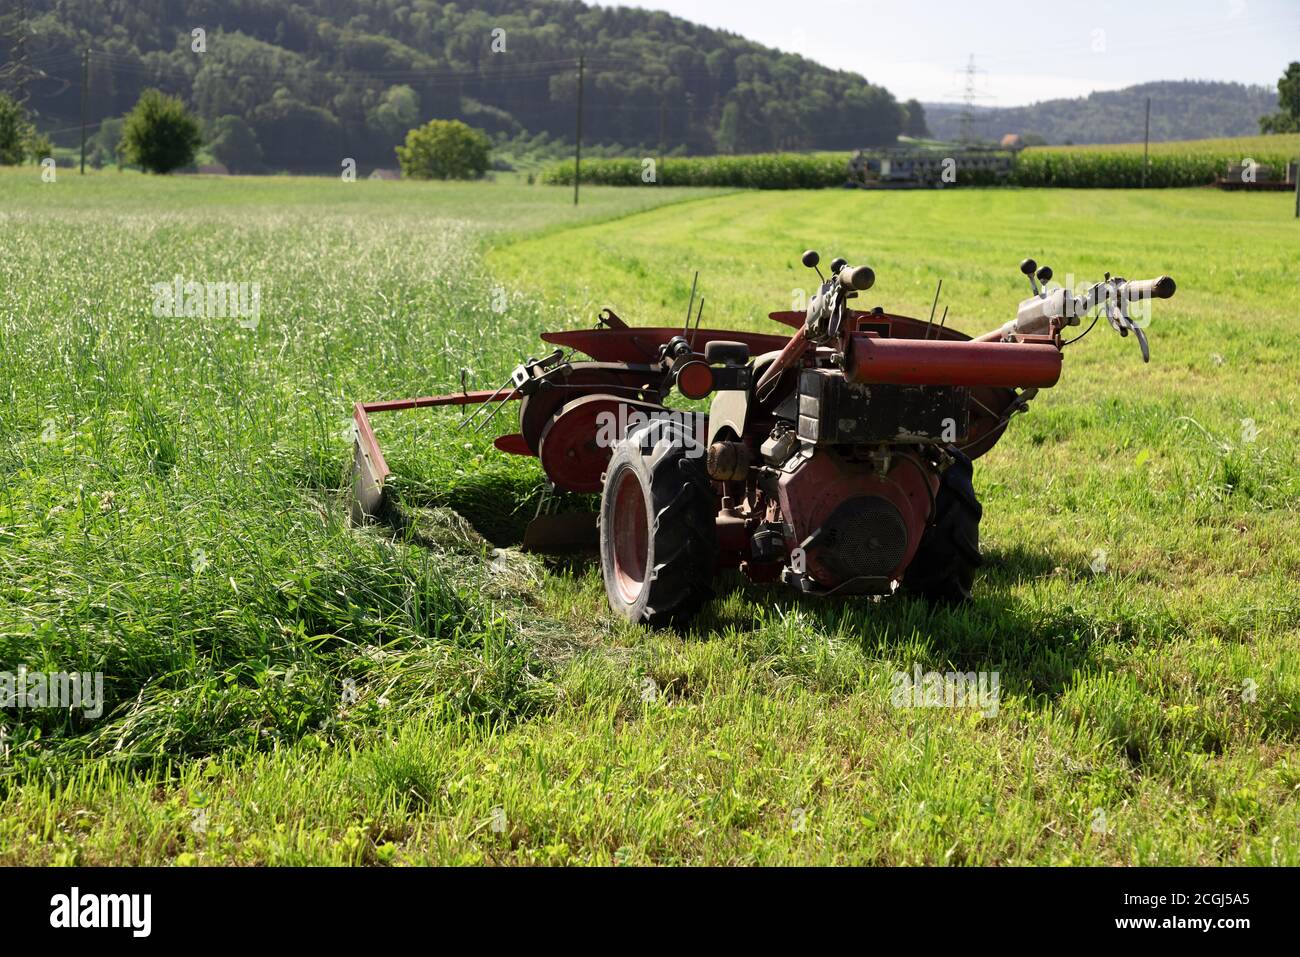 big red two hand lawn mower the farmer use to cut grass, machine stands without person on the field, half mowed, the other side is covered with uncut Stock Photo